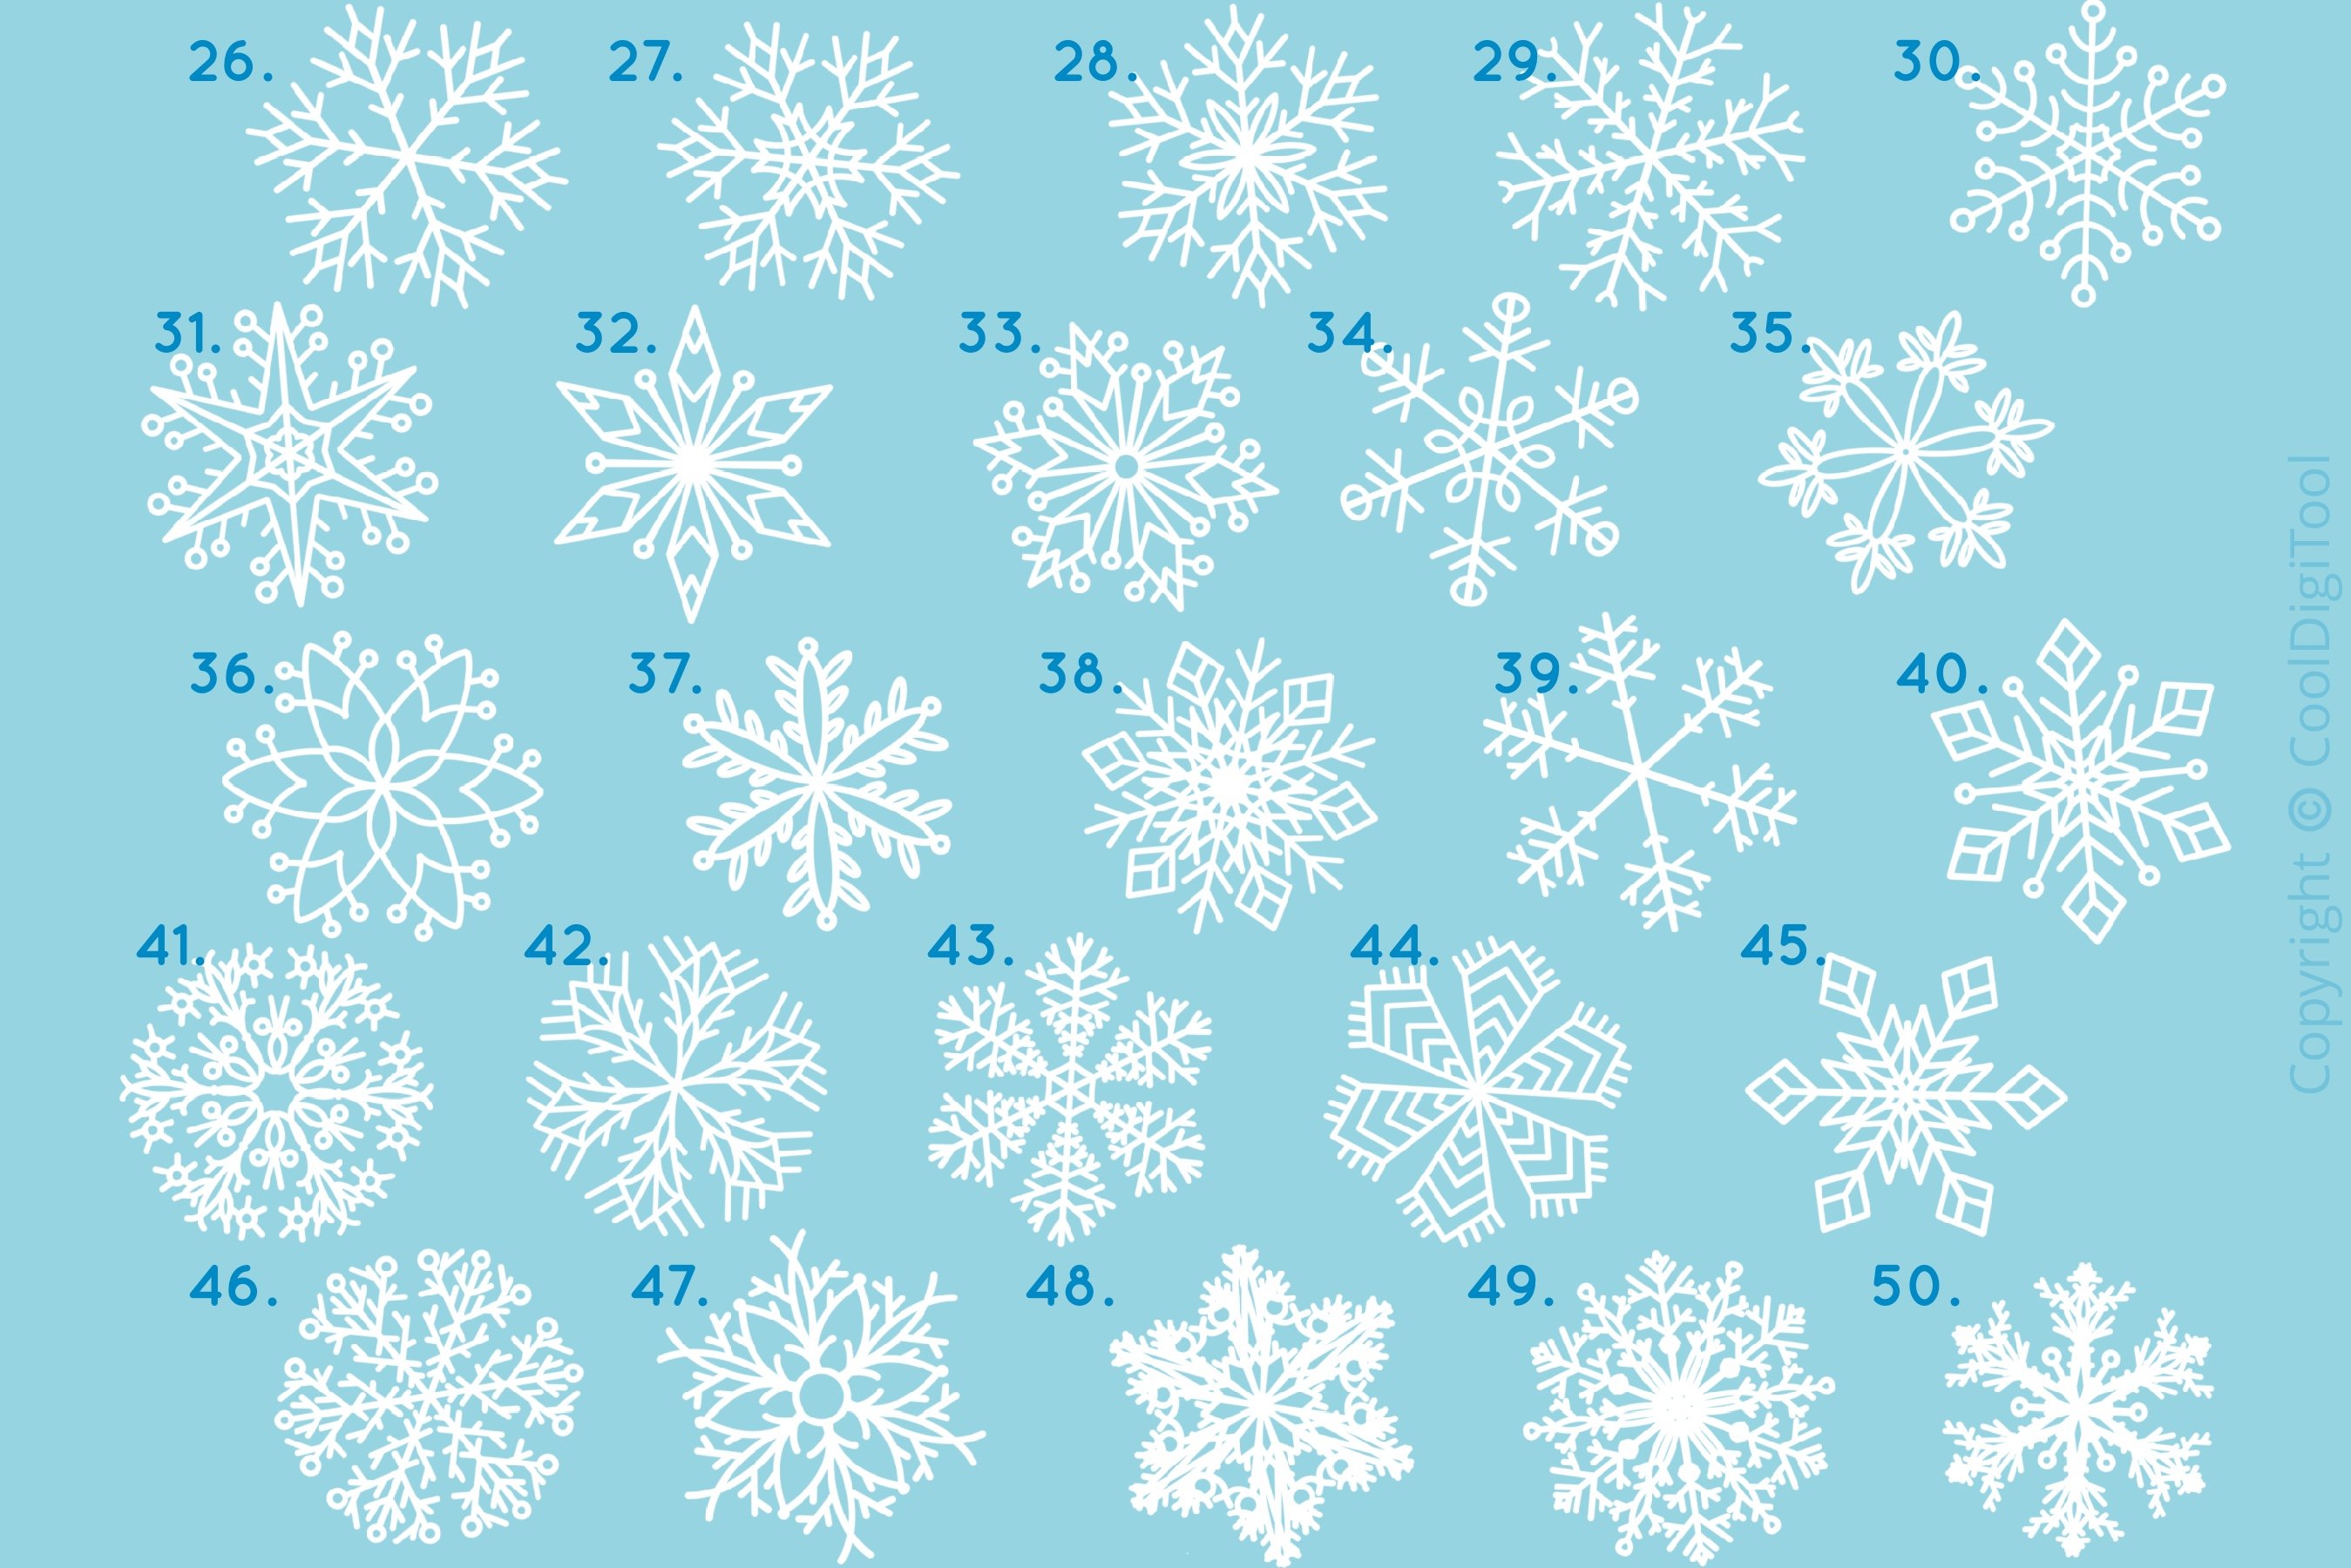 Snowflake Stamps: 55 Beautiful Procreate Brushes For Christmas